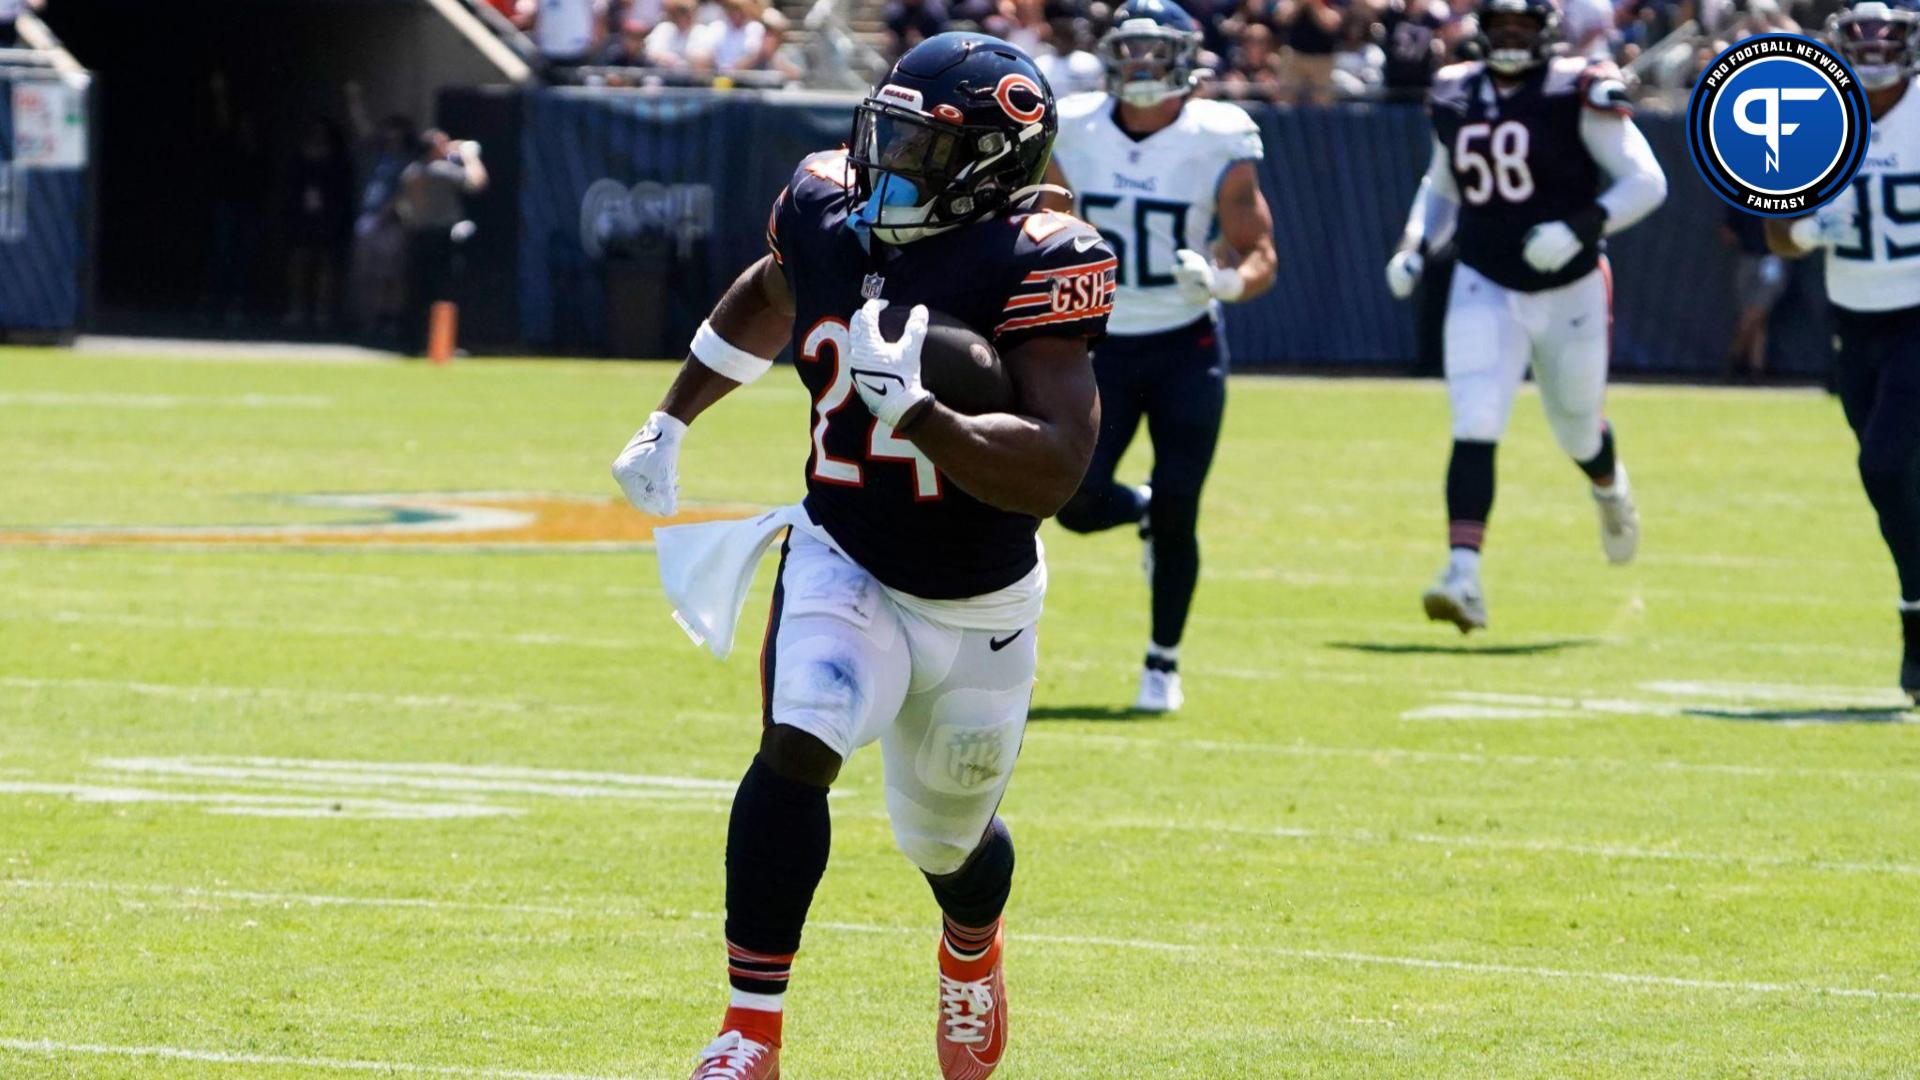 Chicago Bears running back Khalil Herbert (24) catches a pass and runs for a touchdown against the Tennessee Titans during the first quarter at Soldier Field.